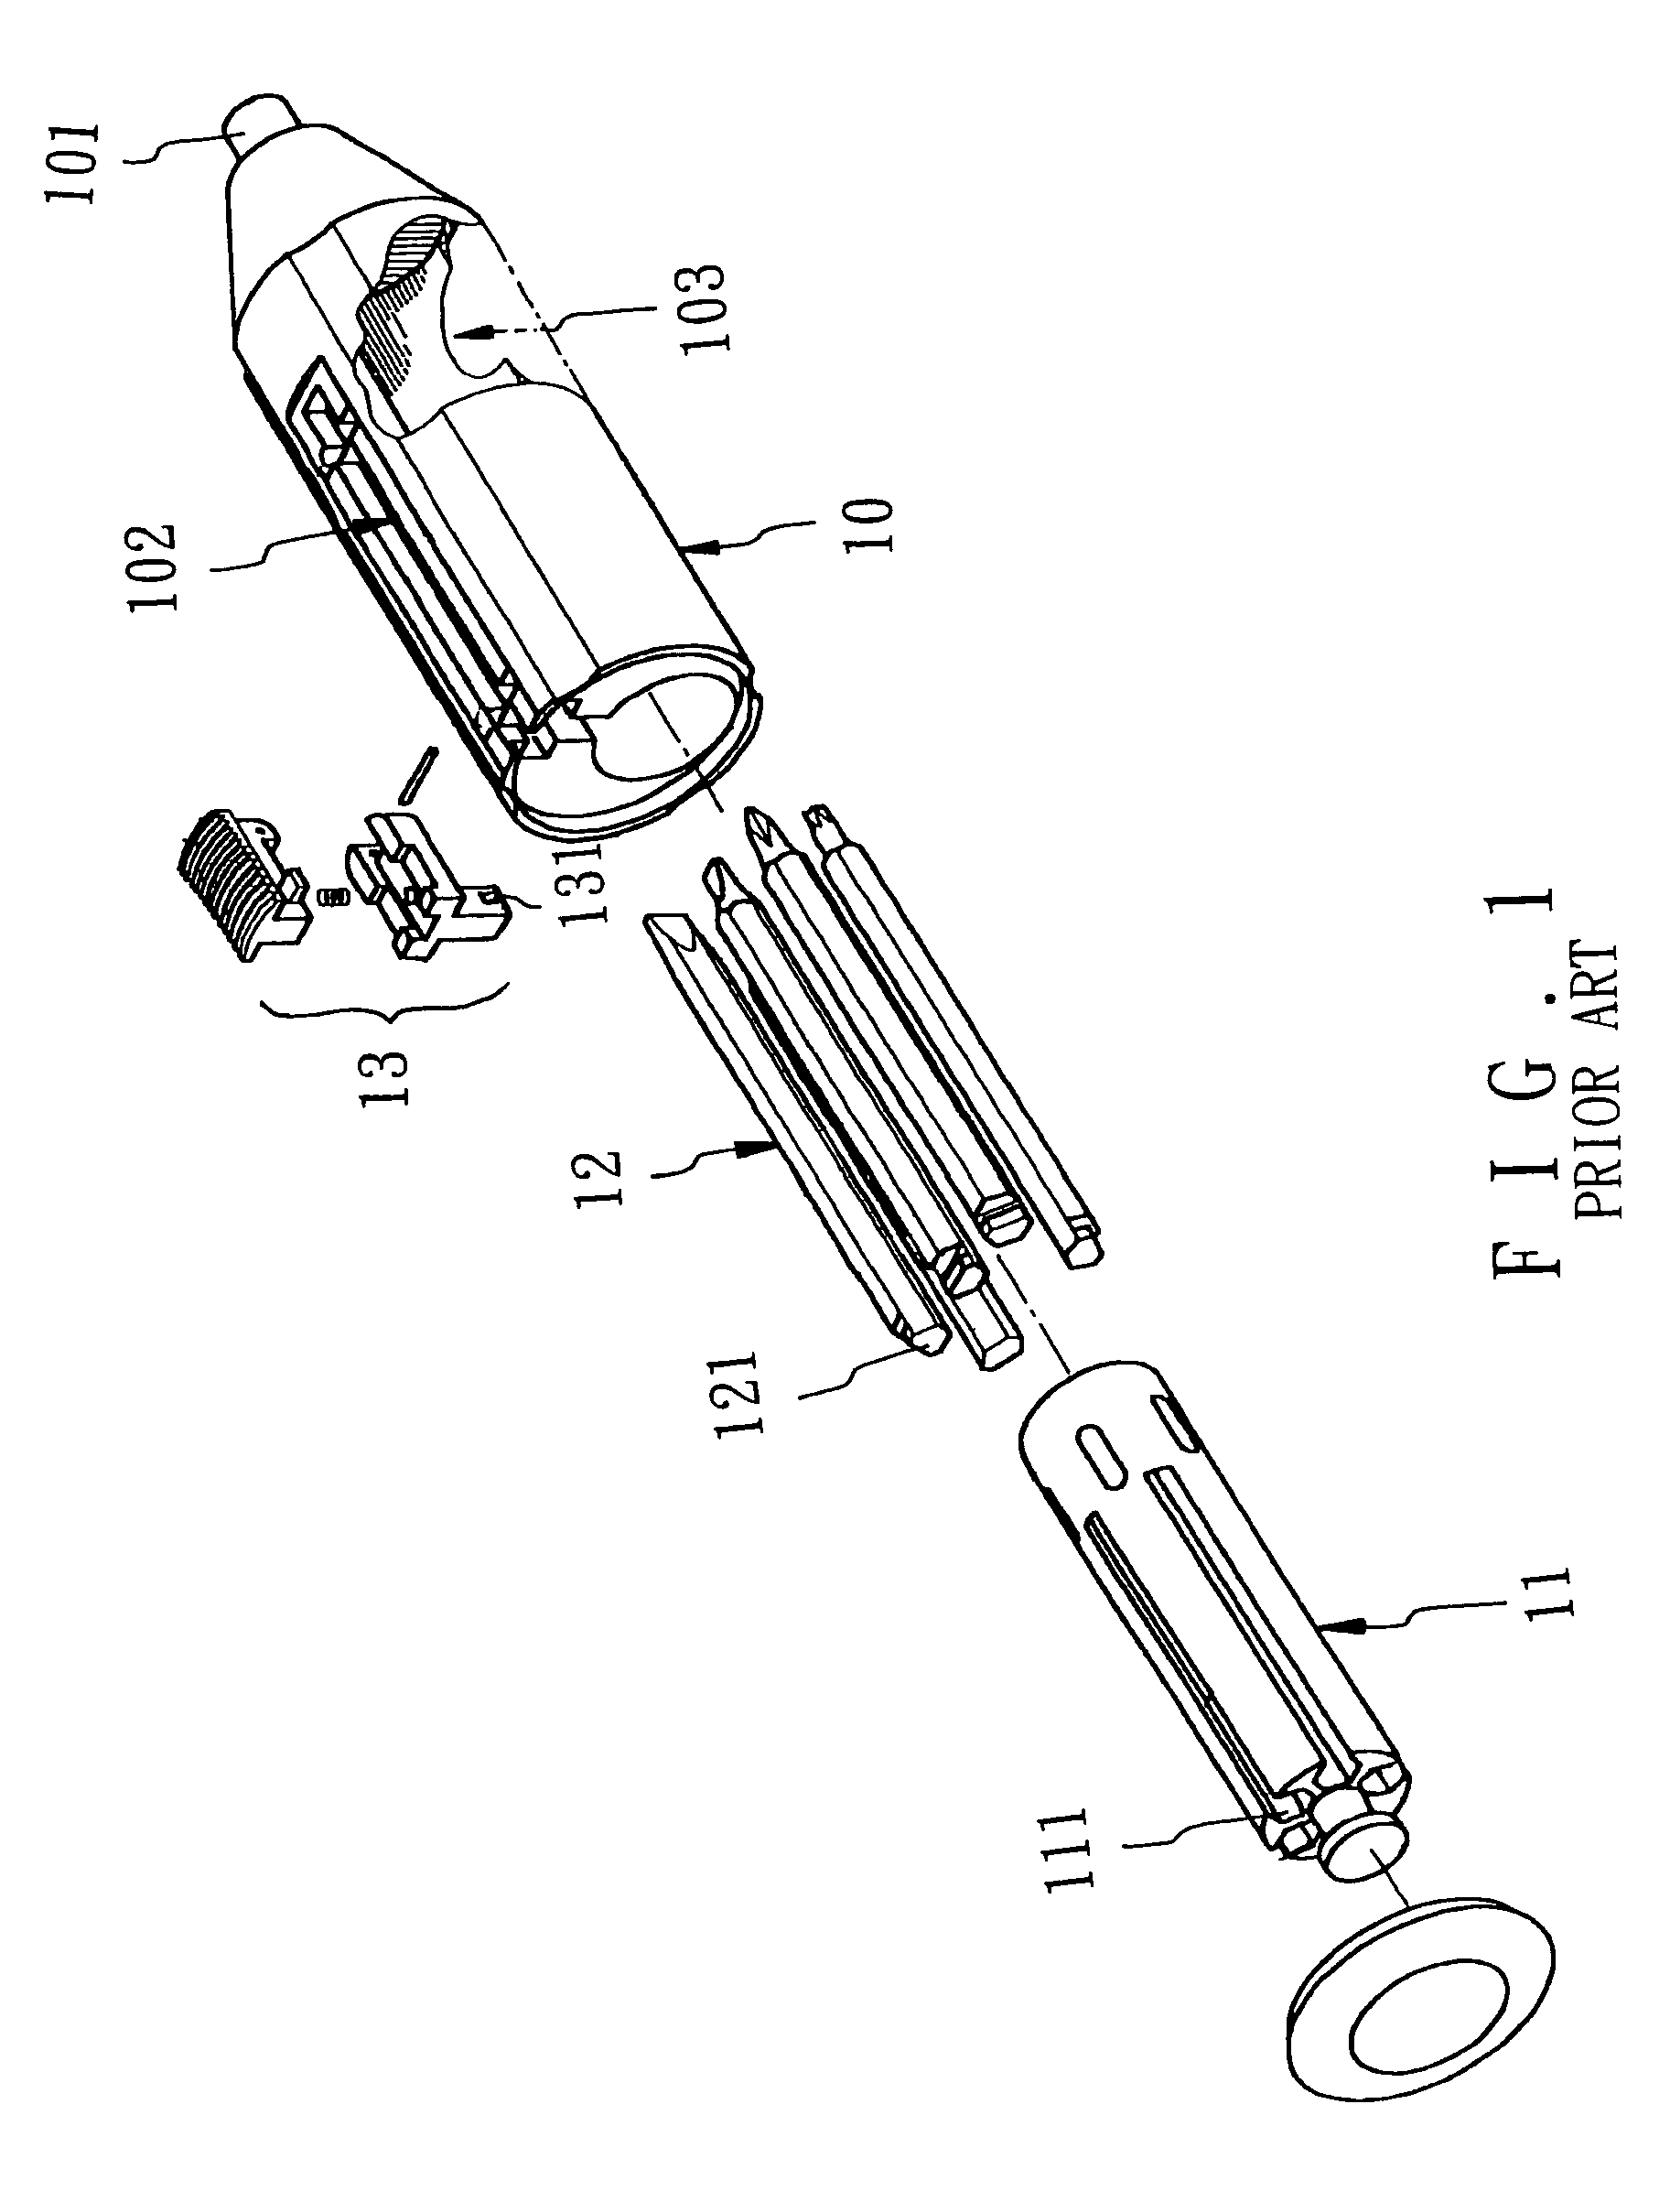 Revolving screwdriver with ratchet device